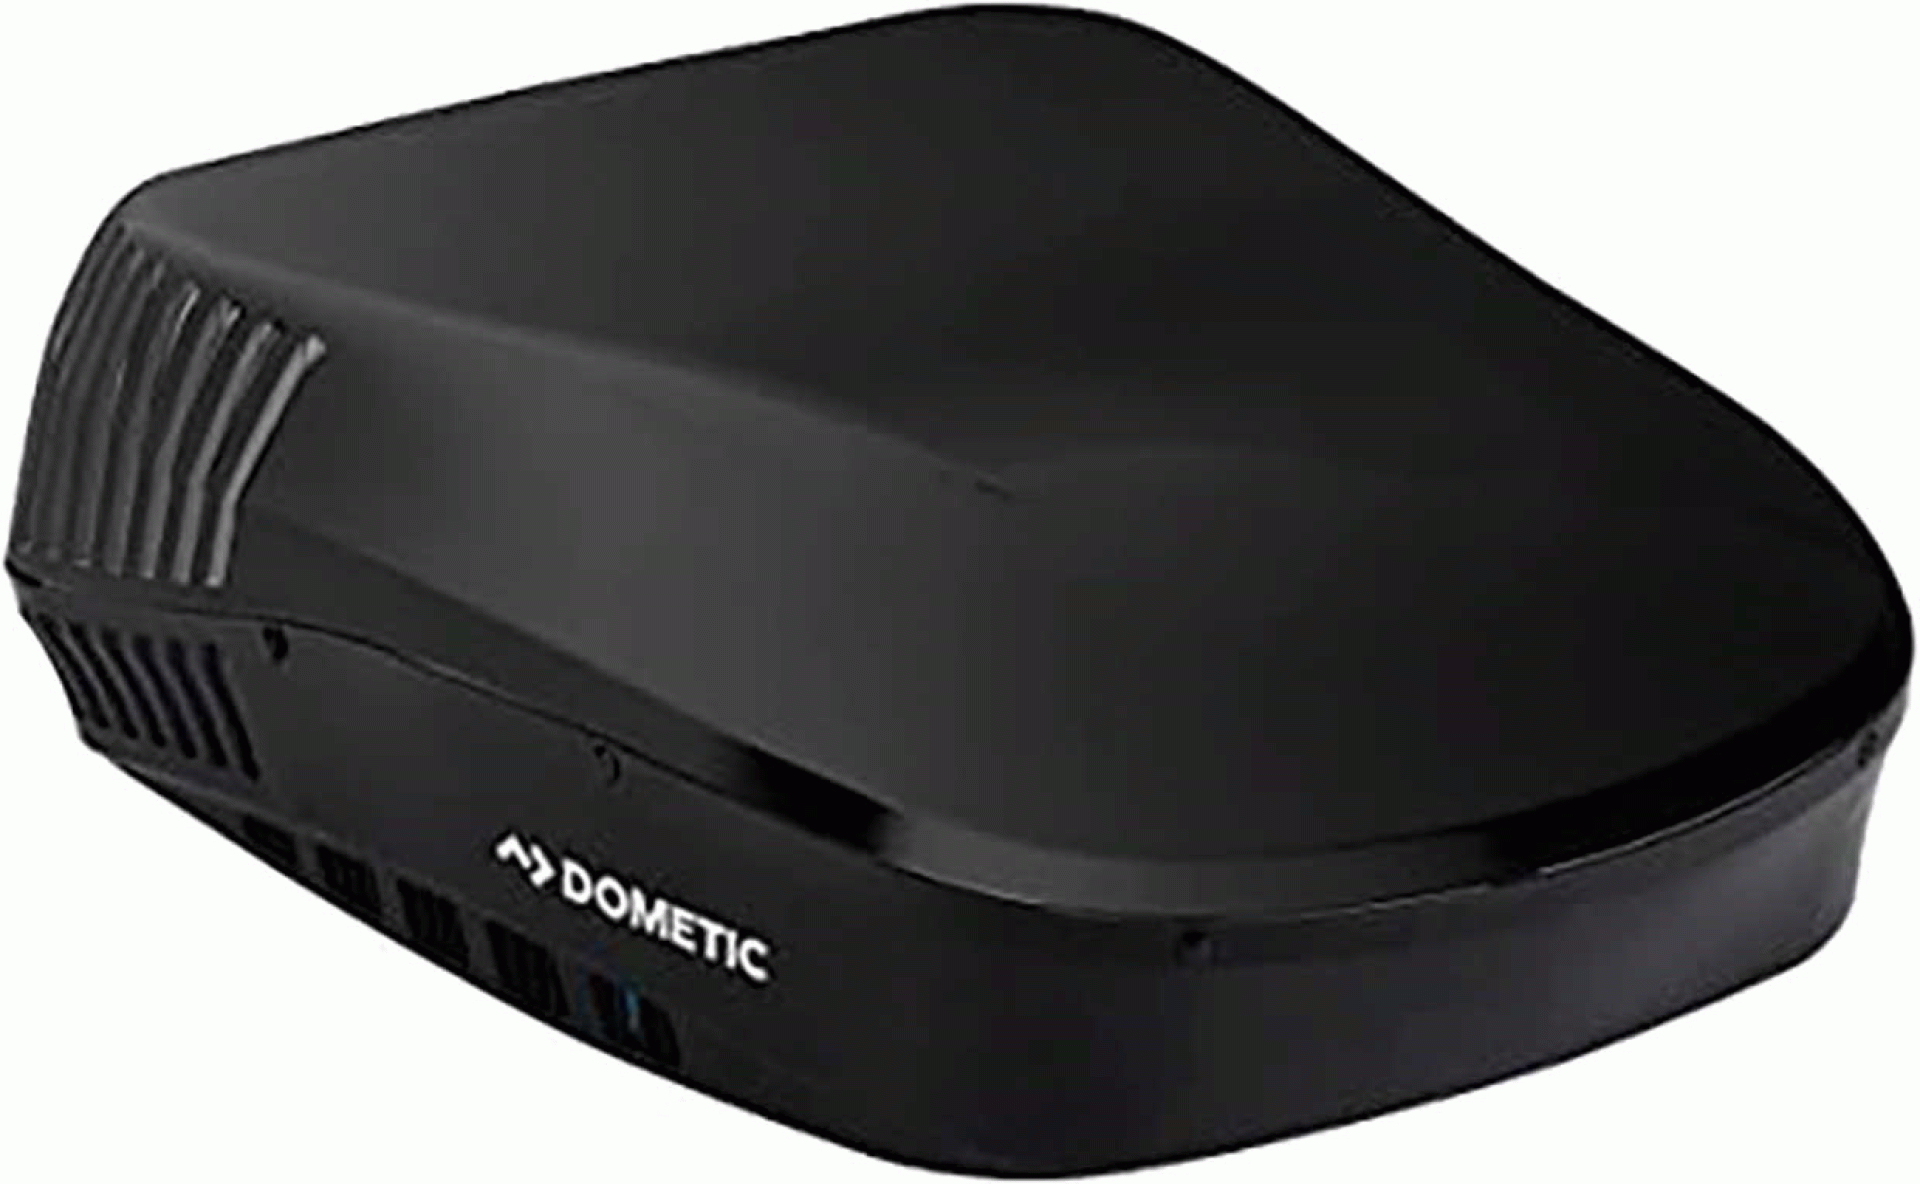 DOMETIC | H541915AXX1J0 | Blizzard NXT 13 500 BTU Air Conditioner Ducted or Non-Ducted Black